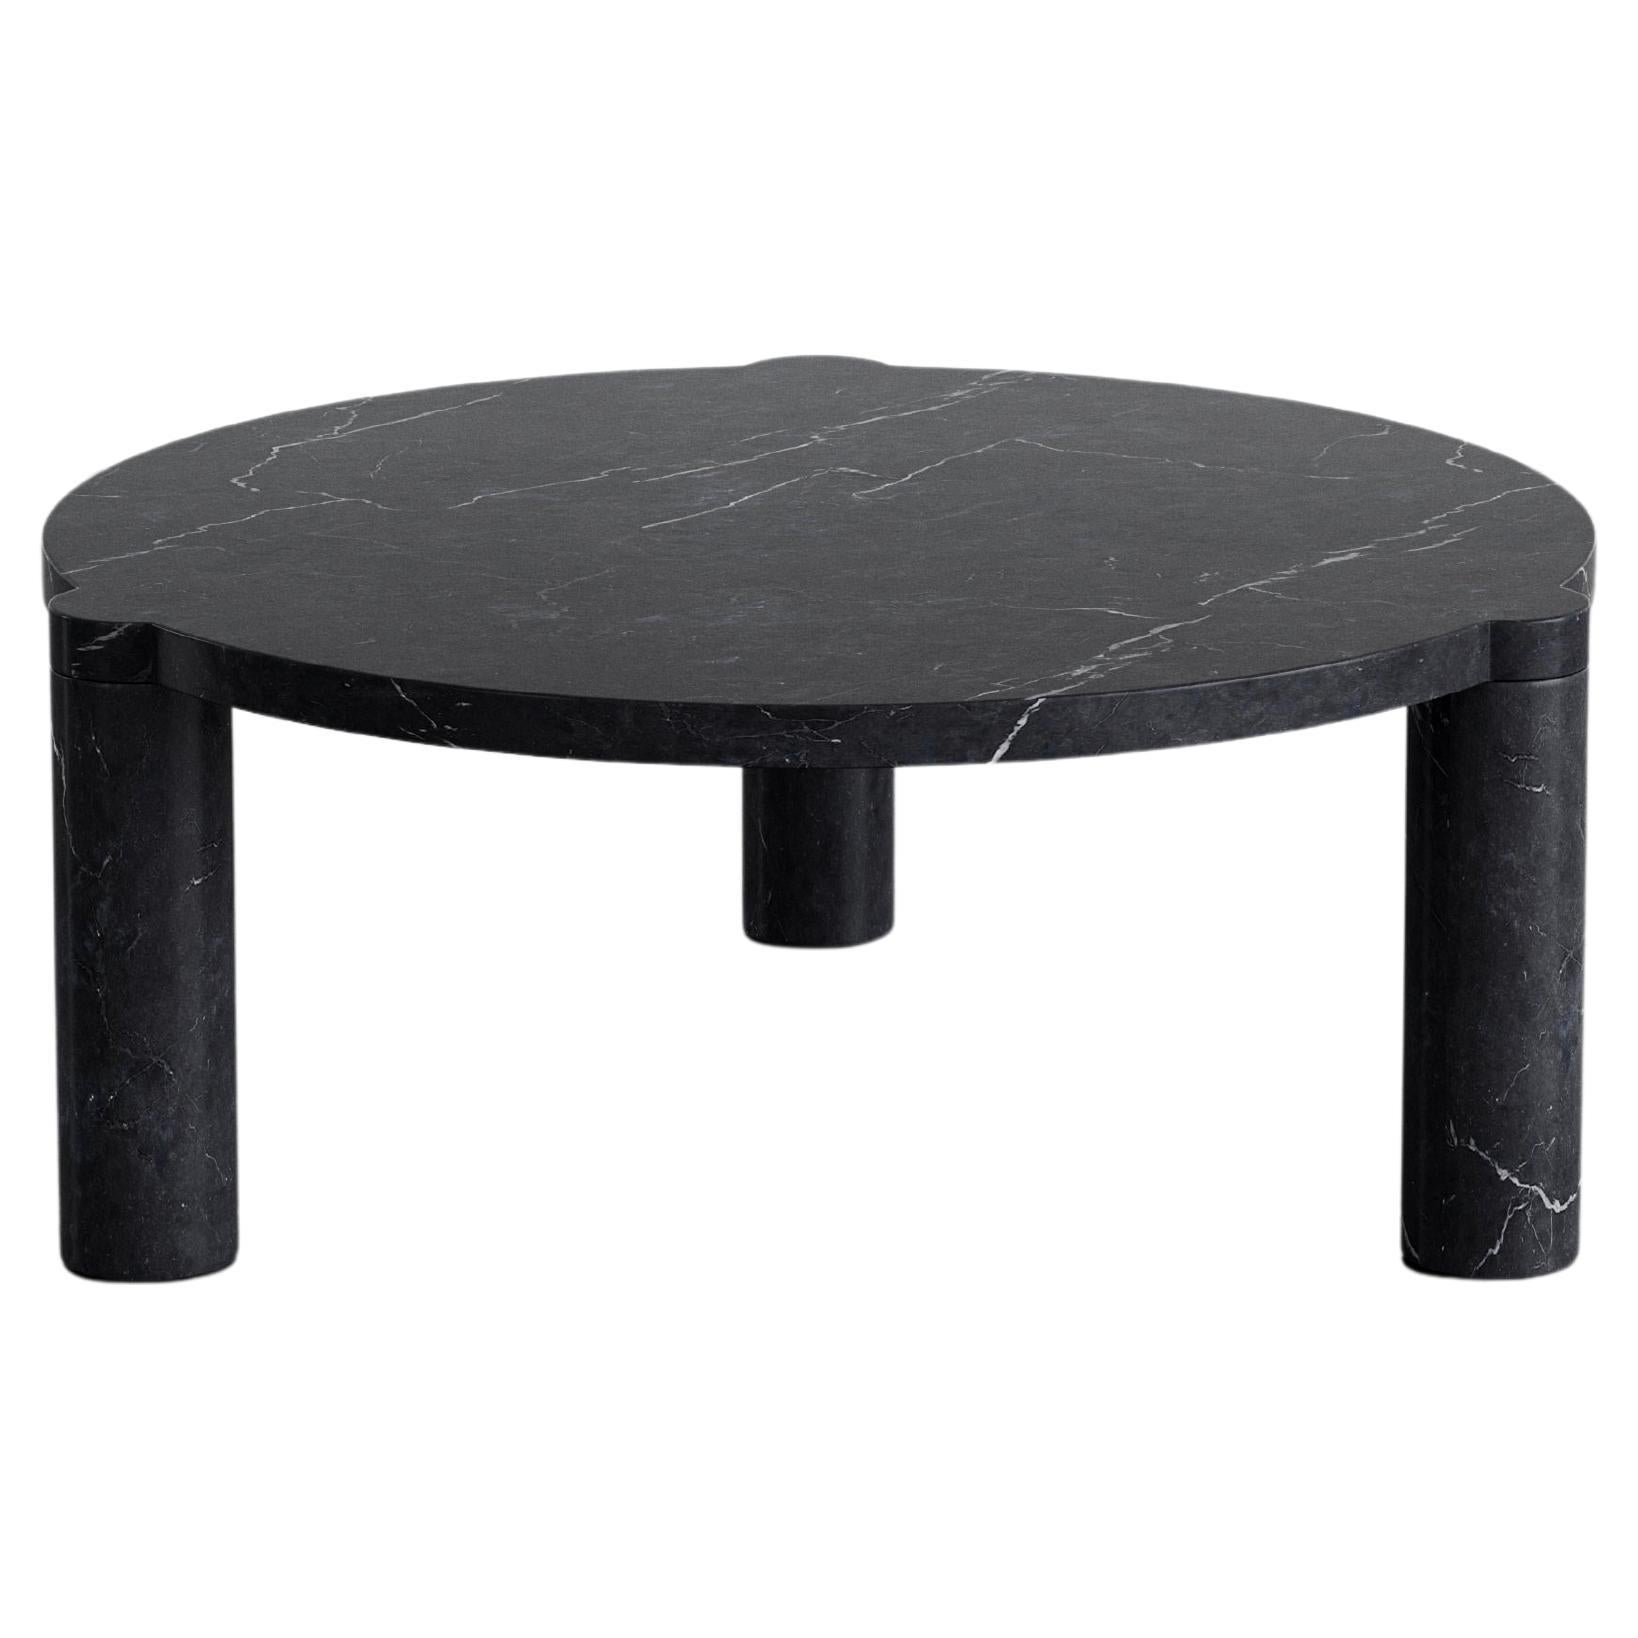 Alexis 80 Marble Coffee Table by Agglomerati